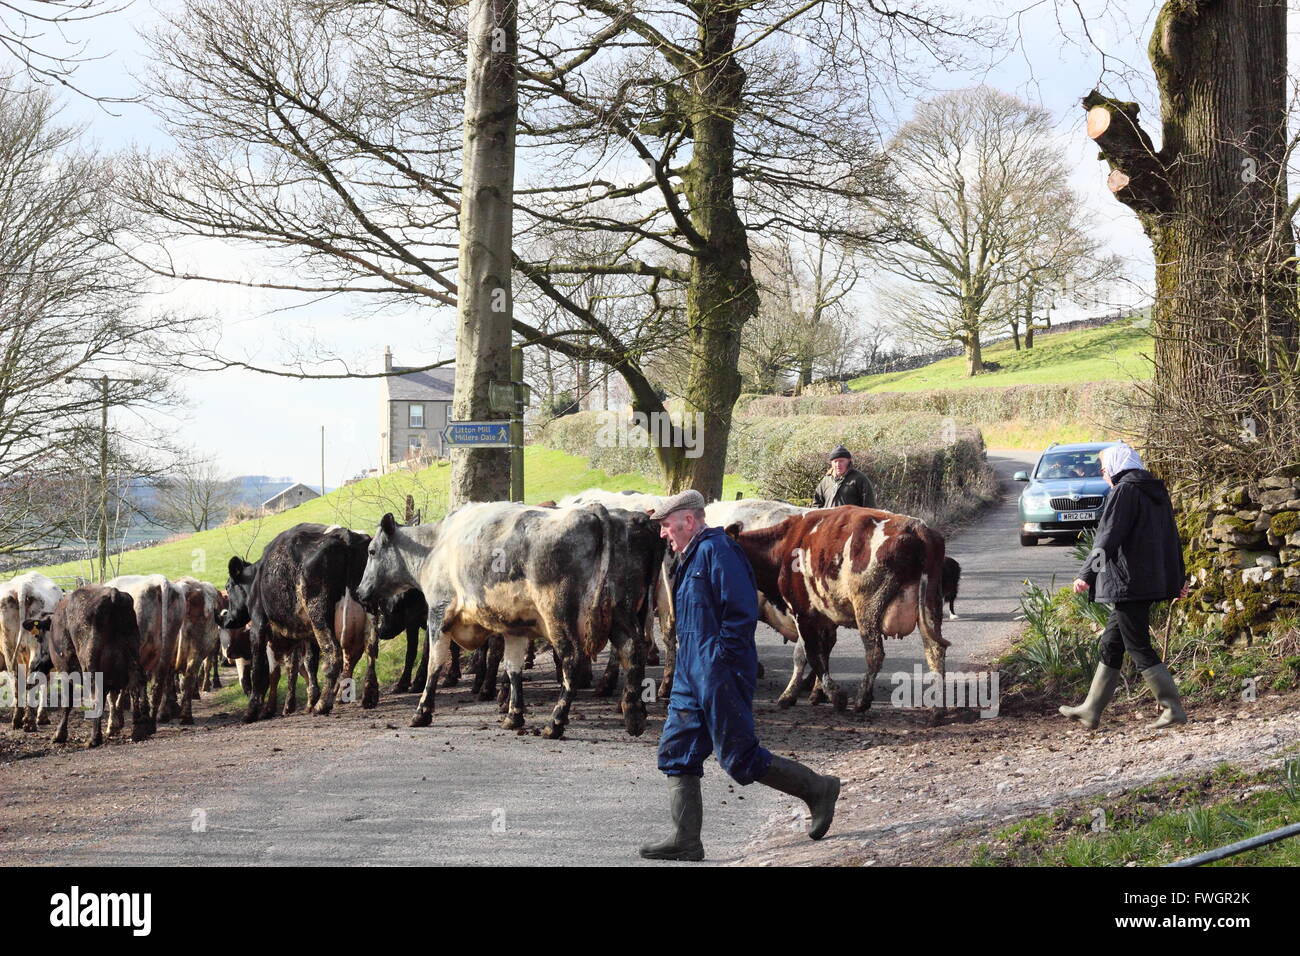 Cattle are steered by farmers across a country lane in the Peak District National Park Derbyshire England UK Stock Photo